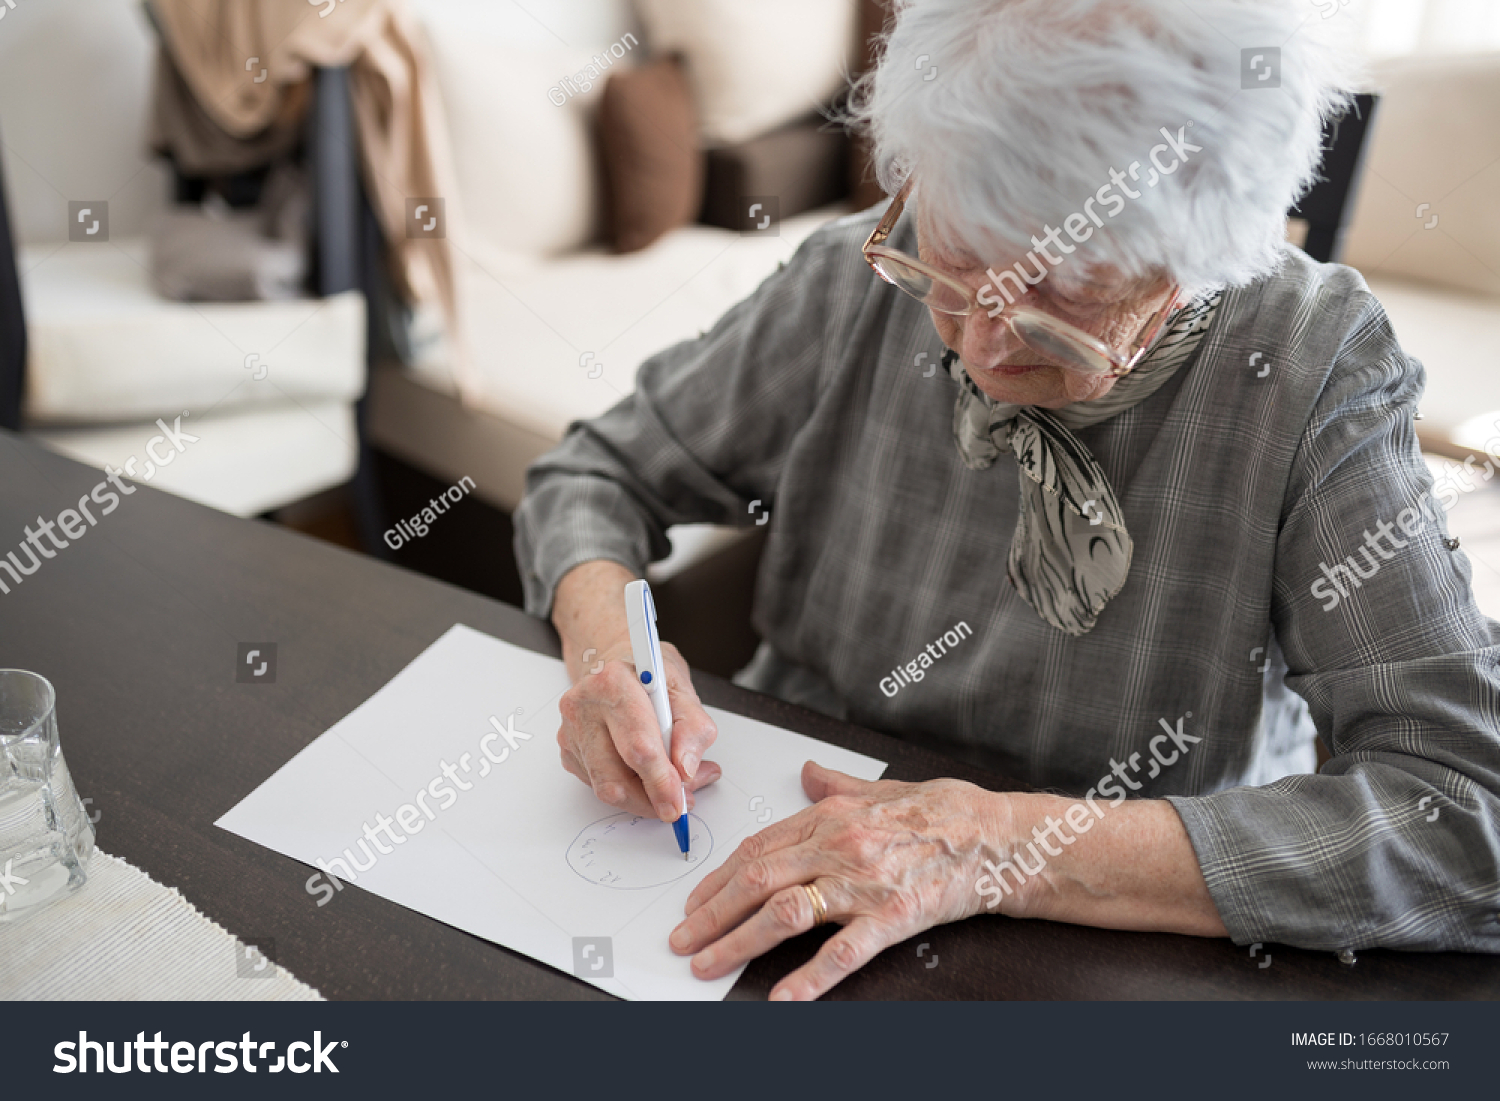 Stock Photo High Angle View Of A Senior Caucasian Woman Doing Alzheimer S Disease Cognitive Functions Clock 1668010567 